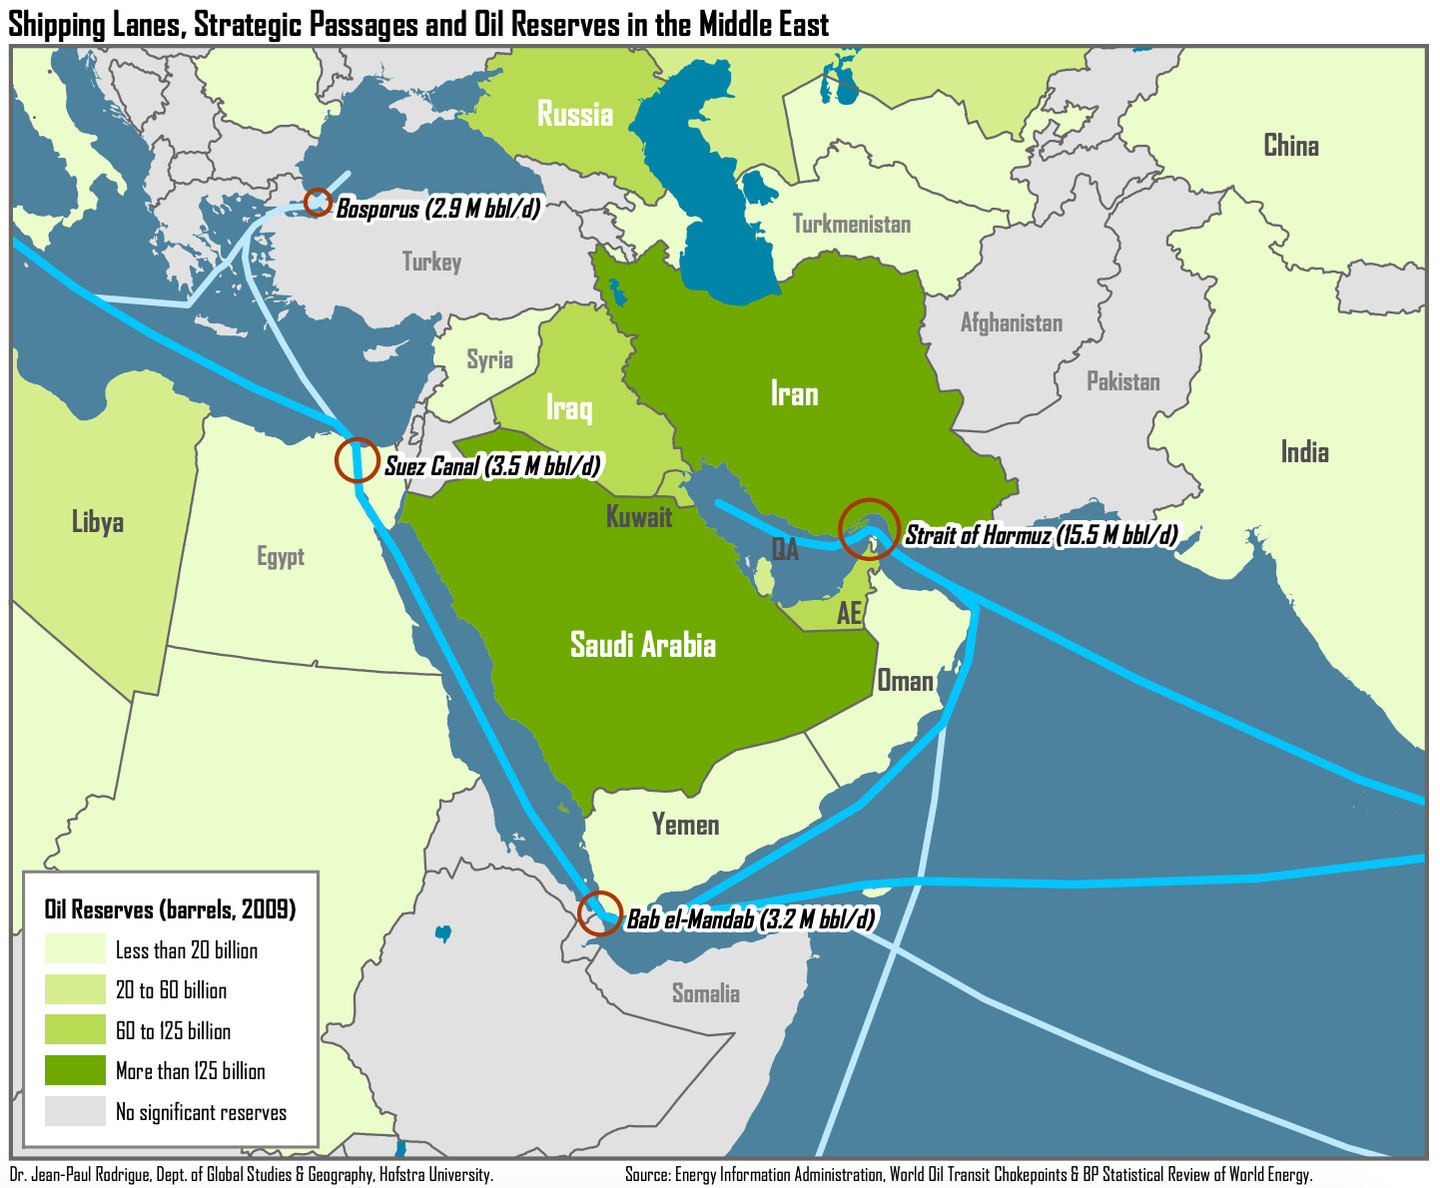 A map of the strategic shipping lanes in the Middle East. <em>Credit: Energy Information Administration, World Oil Transit Chokepoints &amp; BP Statistical Review of World Energy</em>